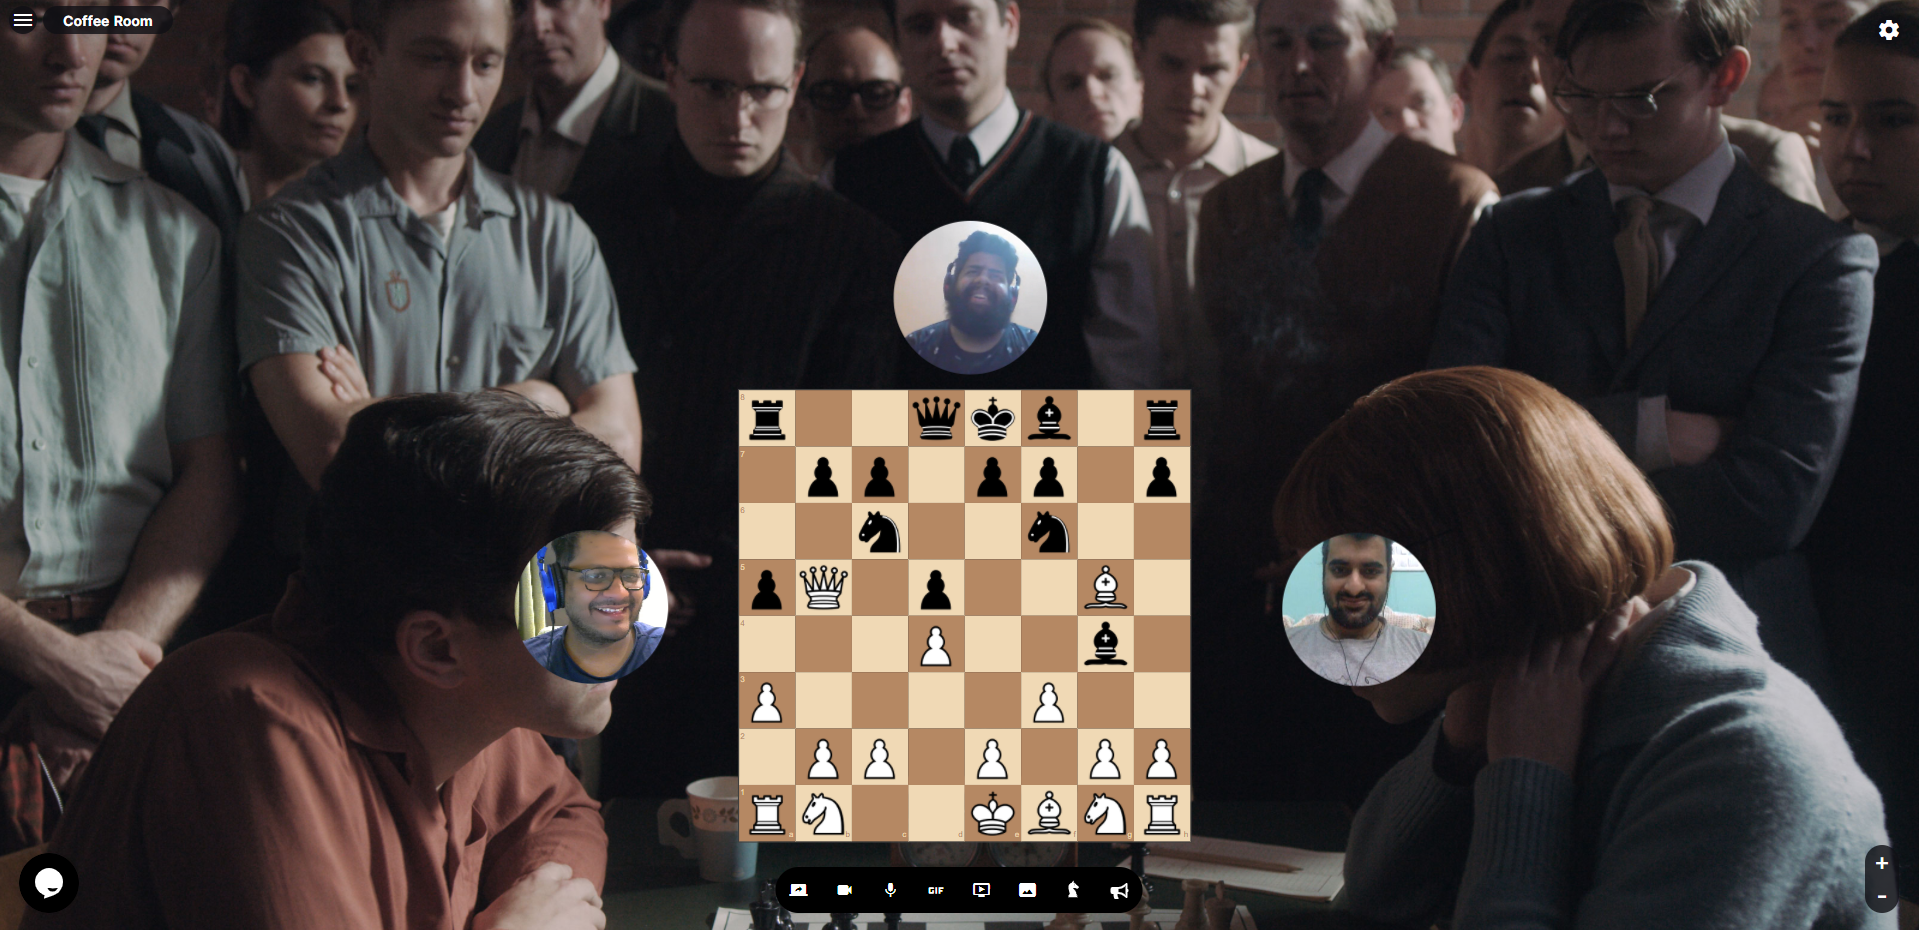 Online chess match with one spectator. 